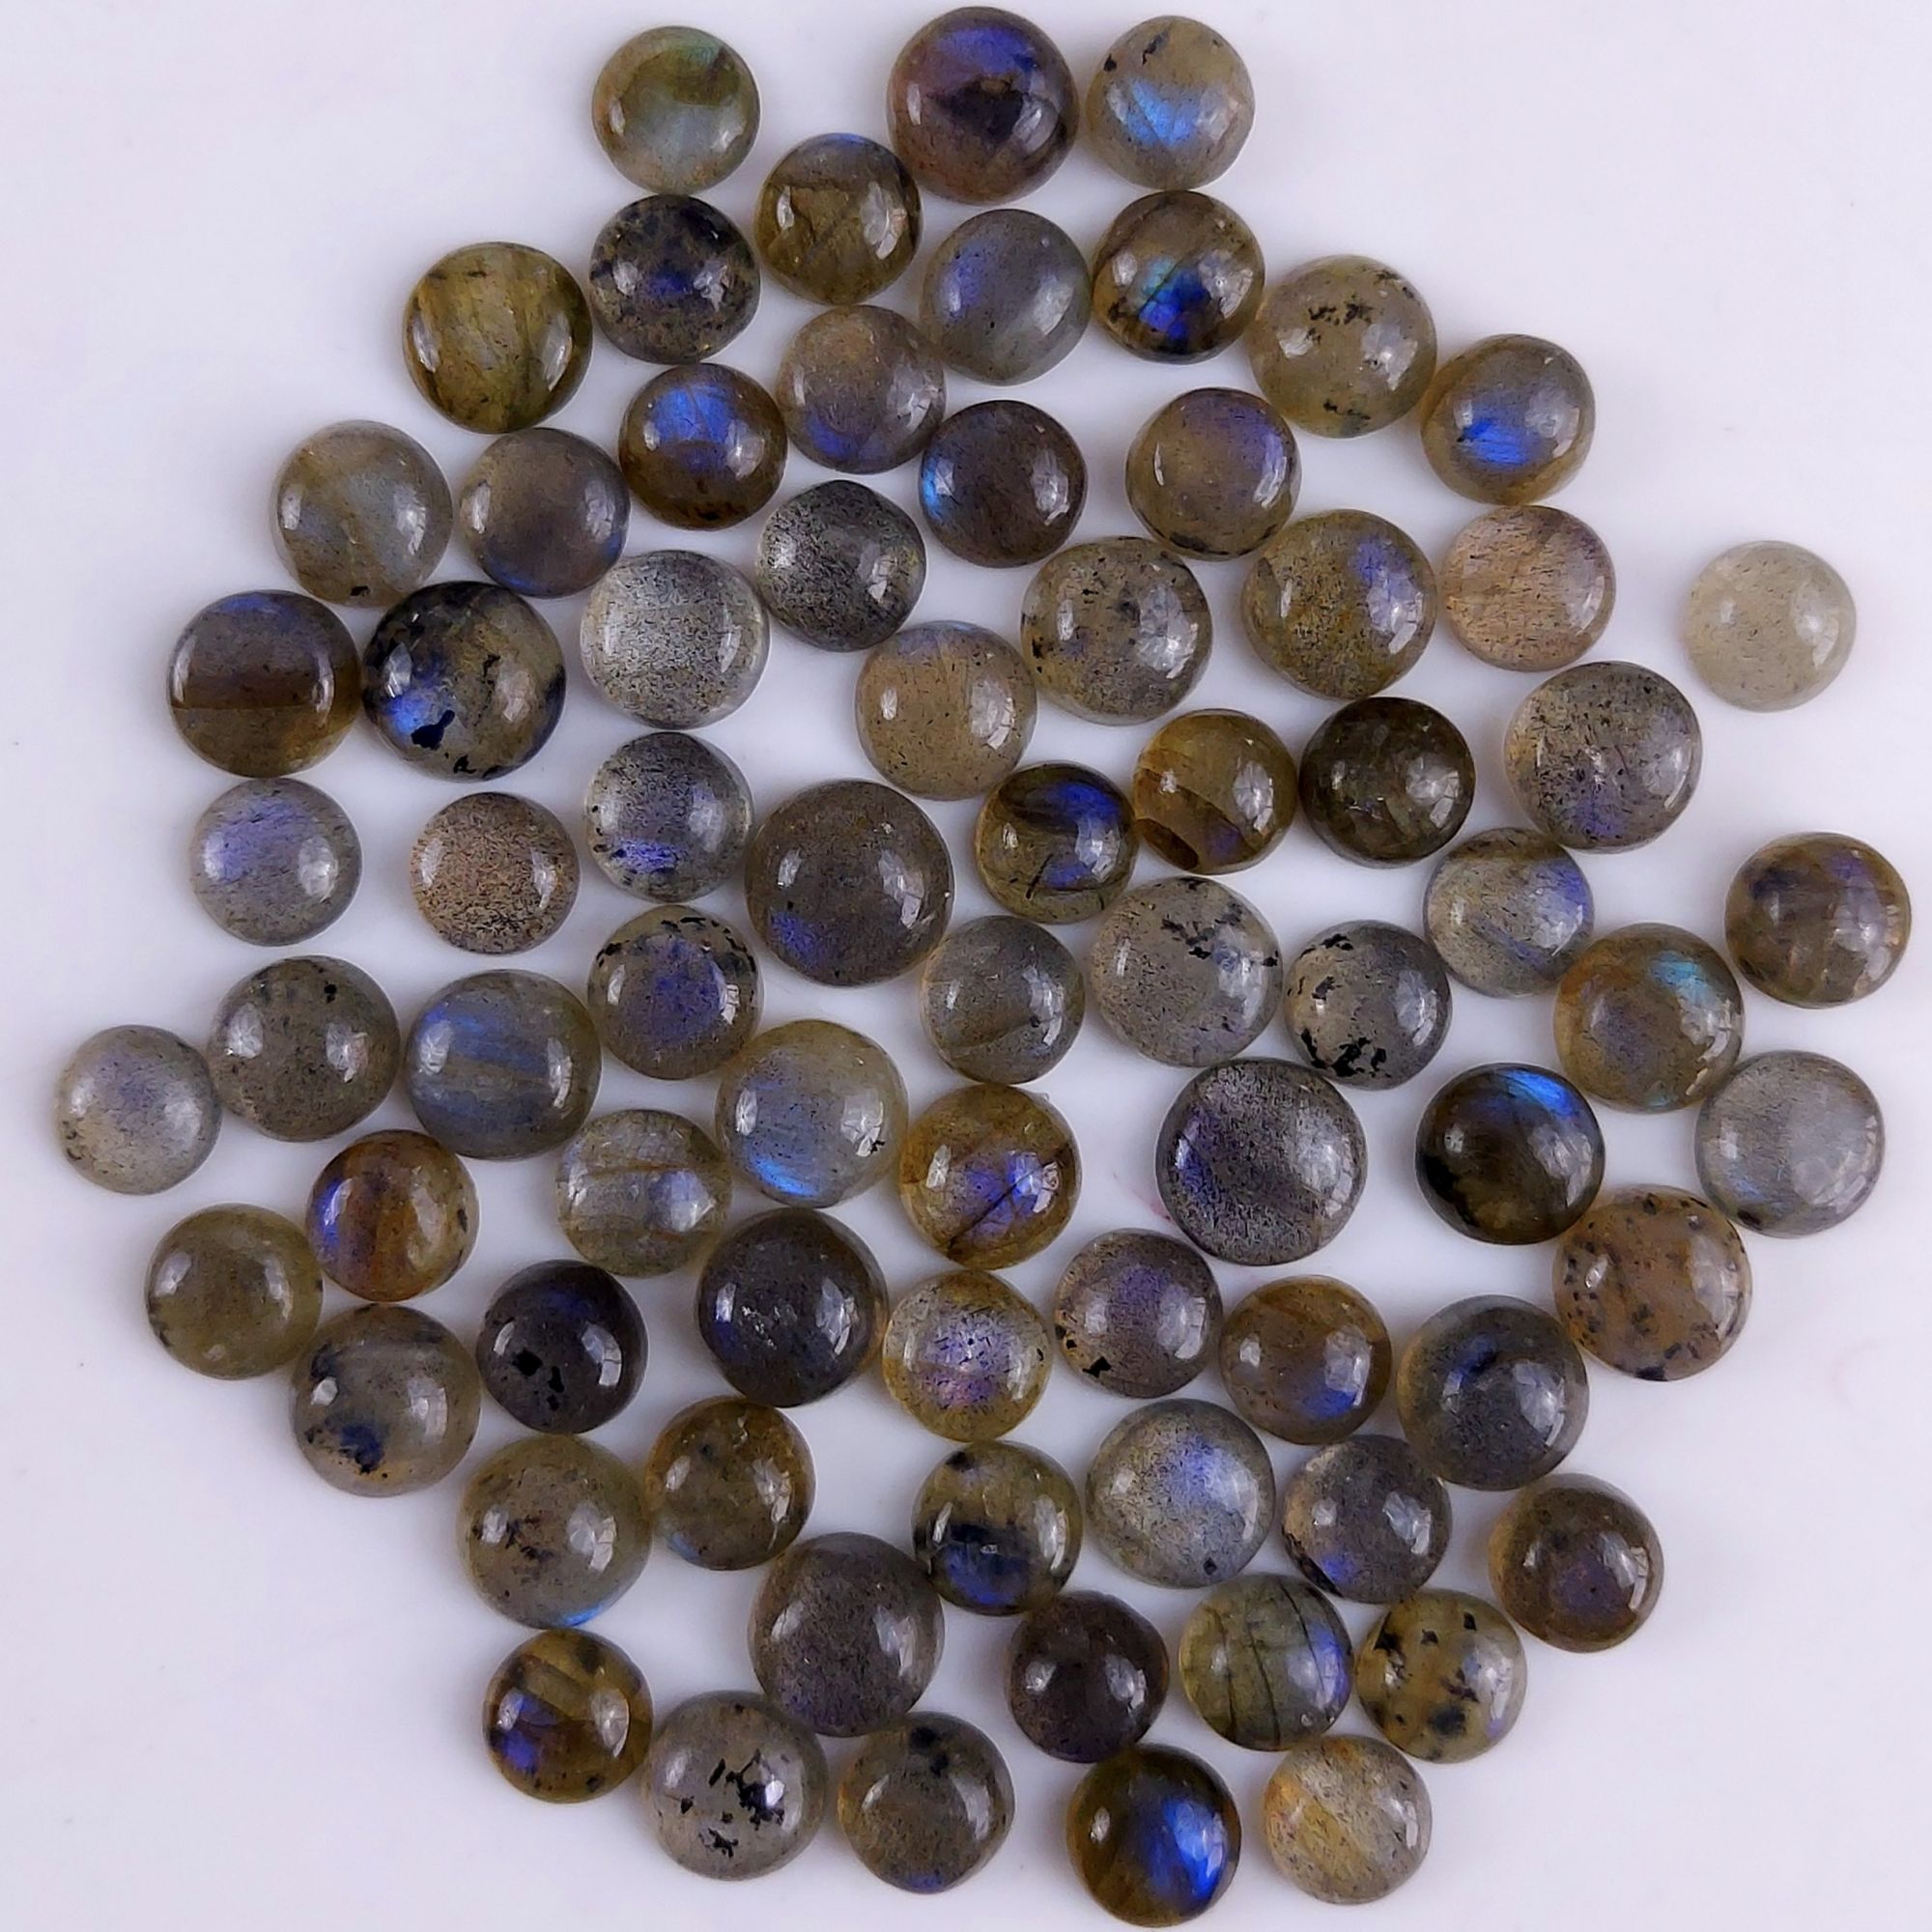 74Pcs 180Cts Natural Blue Labradorite Calibrated Cabochon Round Shape Gemstone Lot For Jewelry Making 6x6mm#741